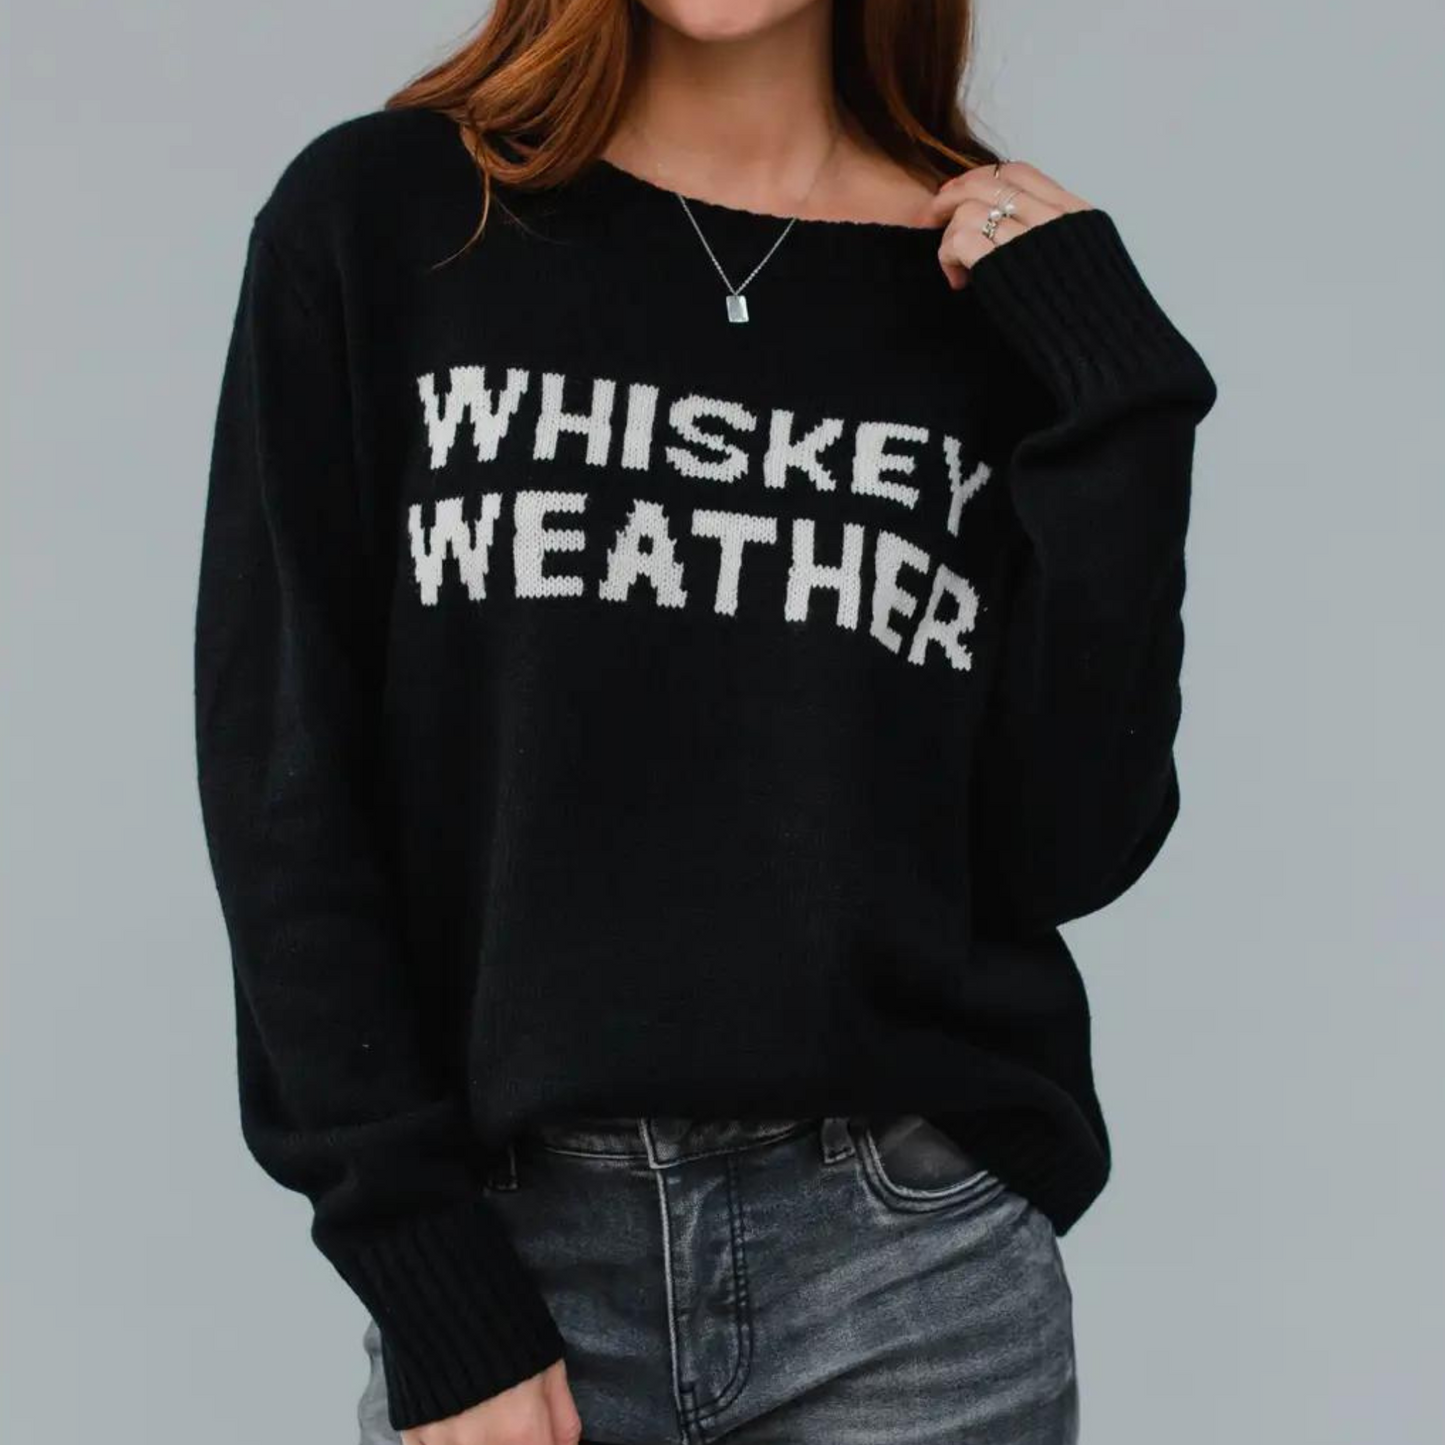 Whiskey Weather Sweater, Whiskey Sweater, Womens Whiskey Sweater, Women's Sweater, Sweater